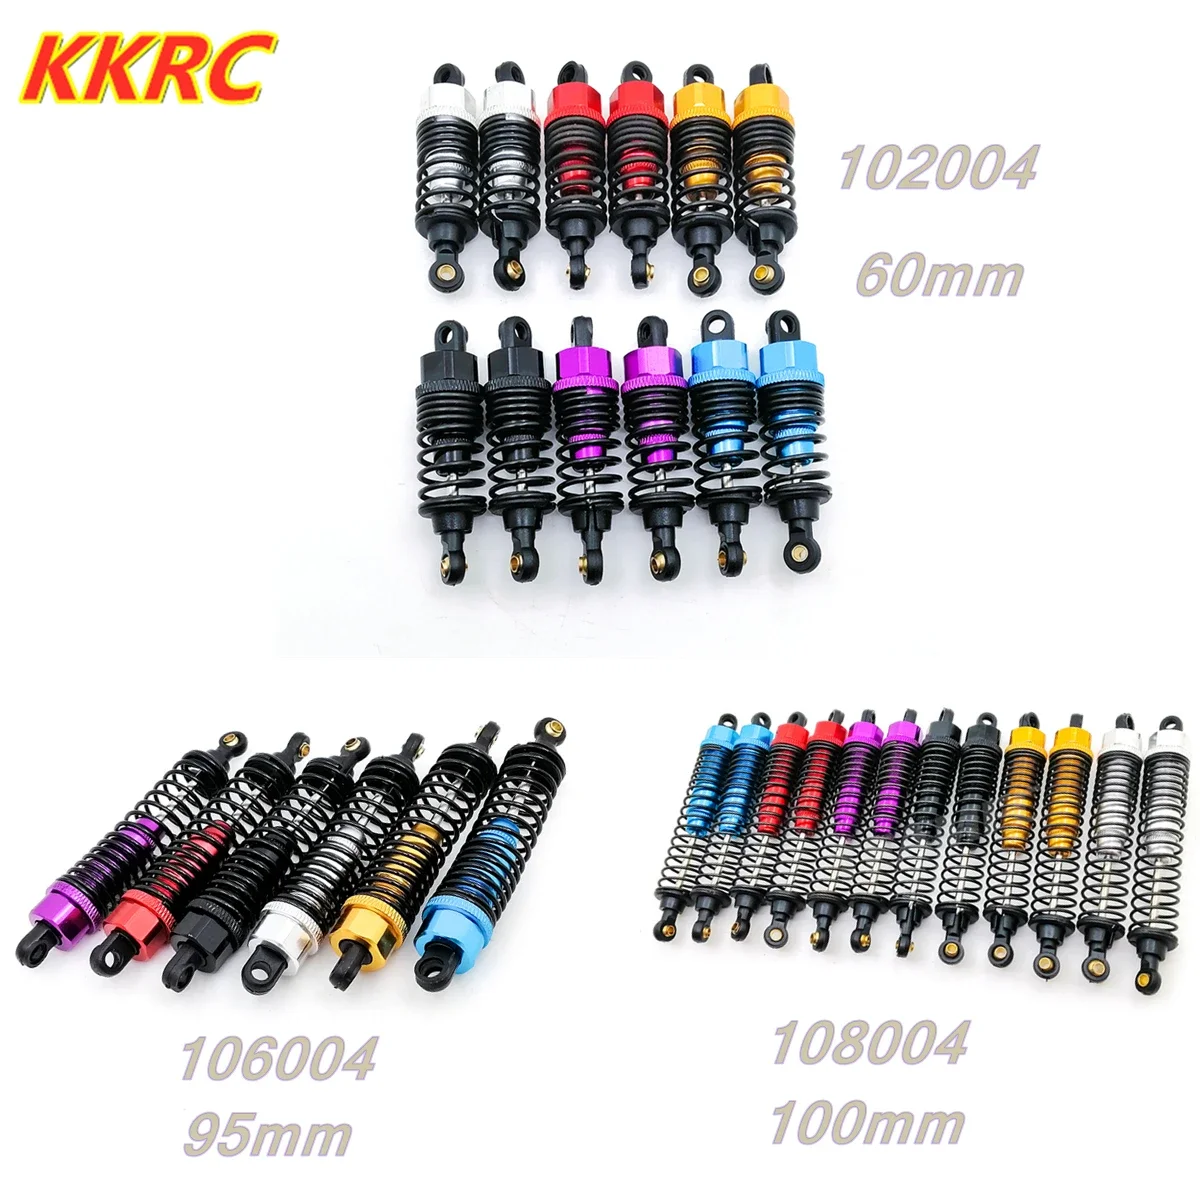 

CatRC HSP Aluminum Alloy Shock Absorber 102004 106004 108004 RC for 1/10 HSP 94101 94102 94103 94122 94166 94111 94188 Fla